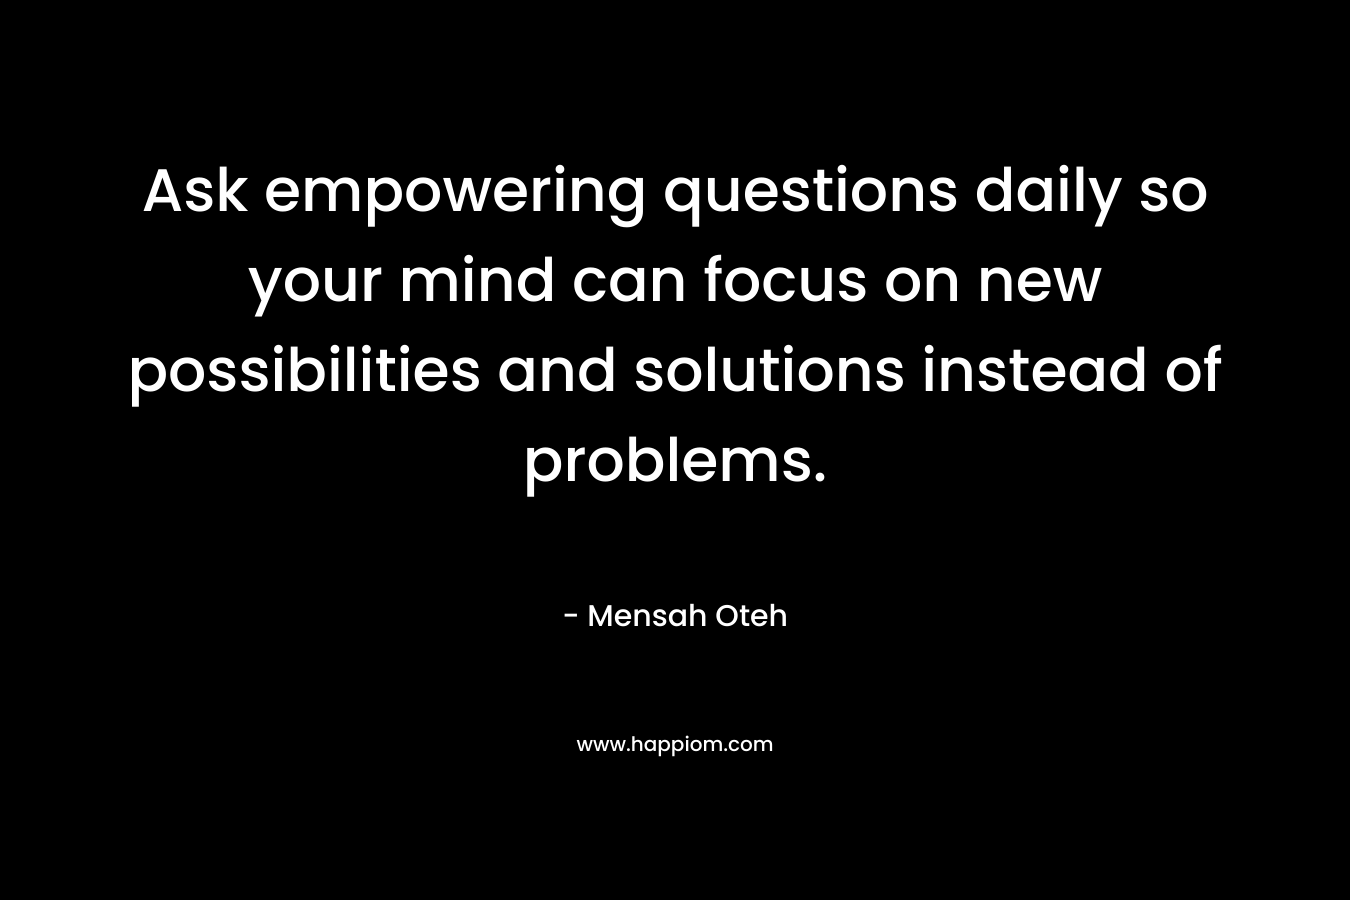 Ask empowering questions daily so your mind can focus on new possibilities and solutions instead of problems.